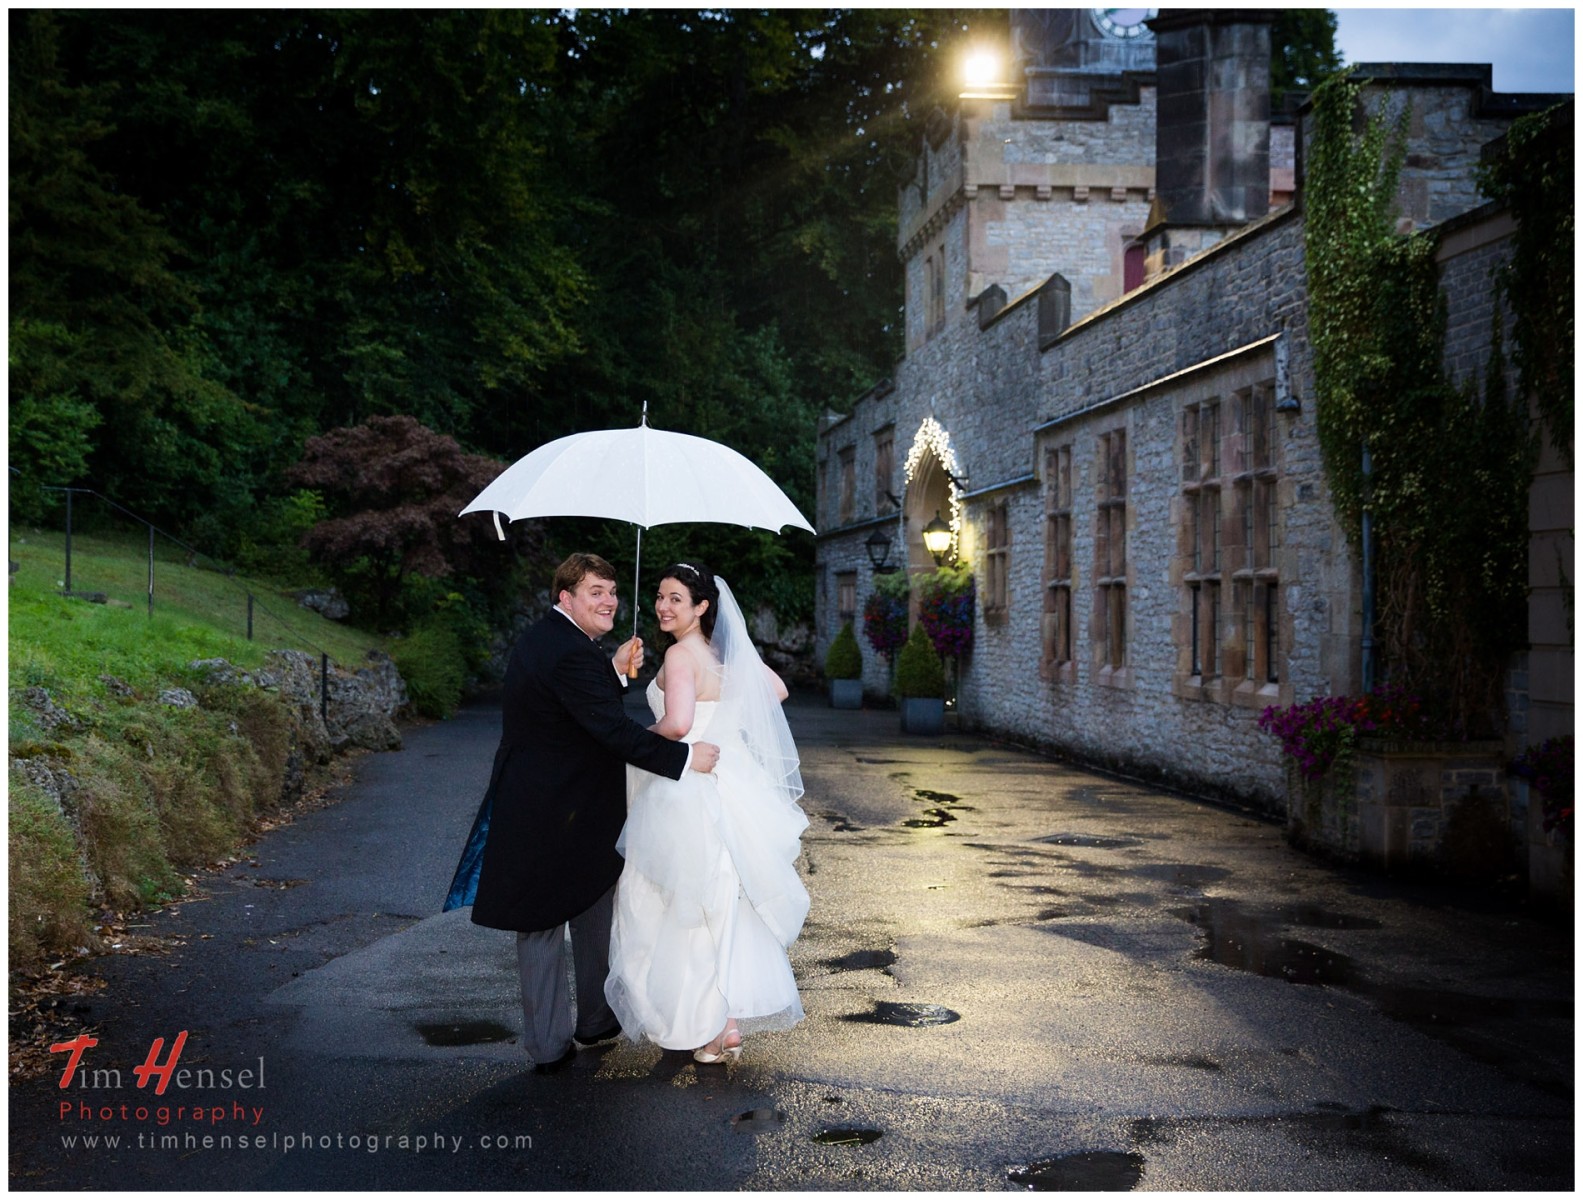 Relaxed and natural, a wedding photograph at thornbridge hall